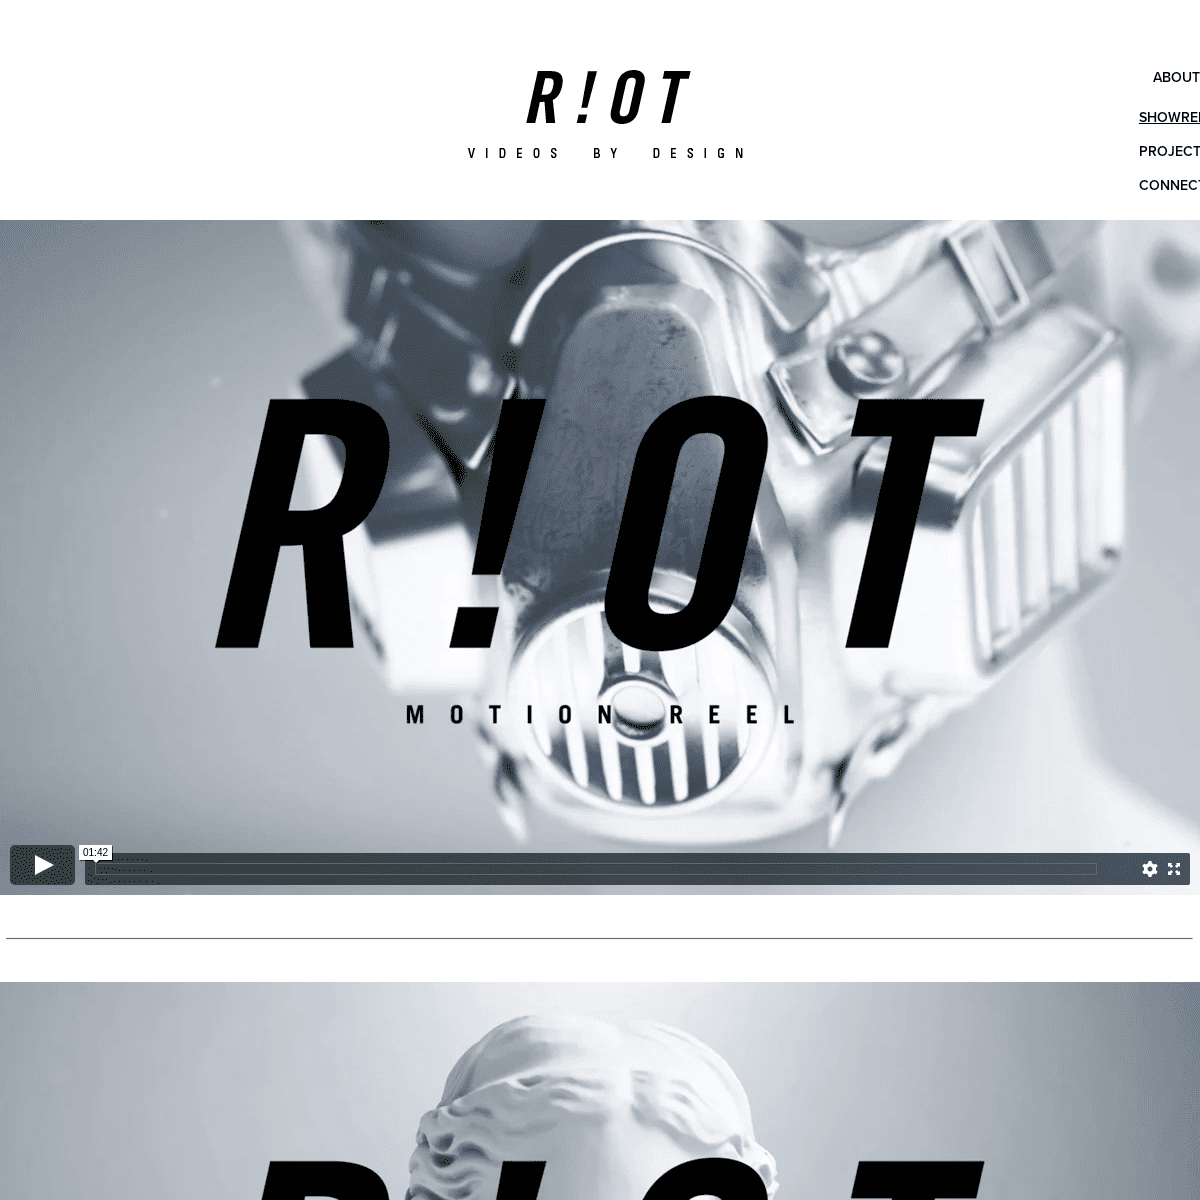 A complete backup of weareriot.tv